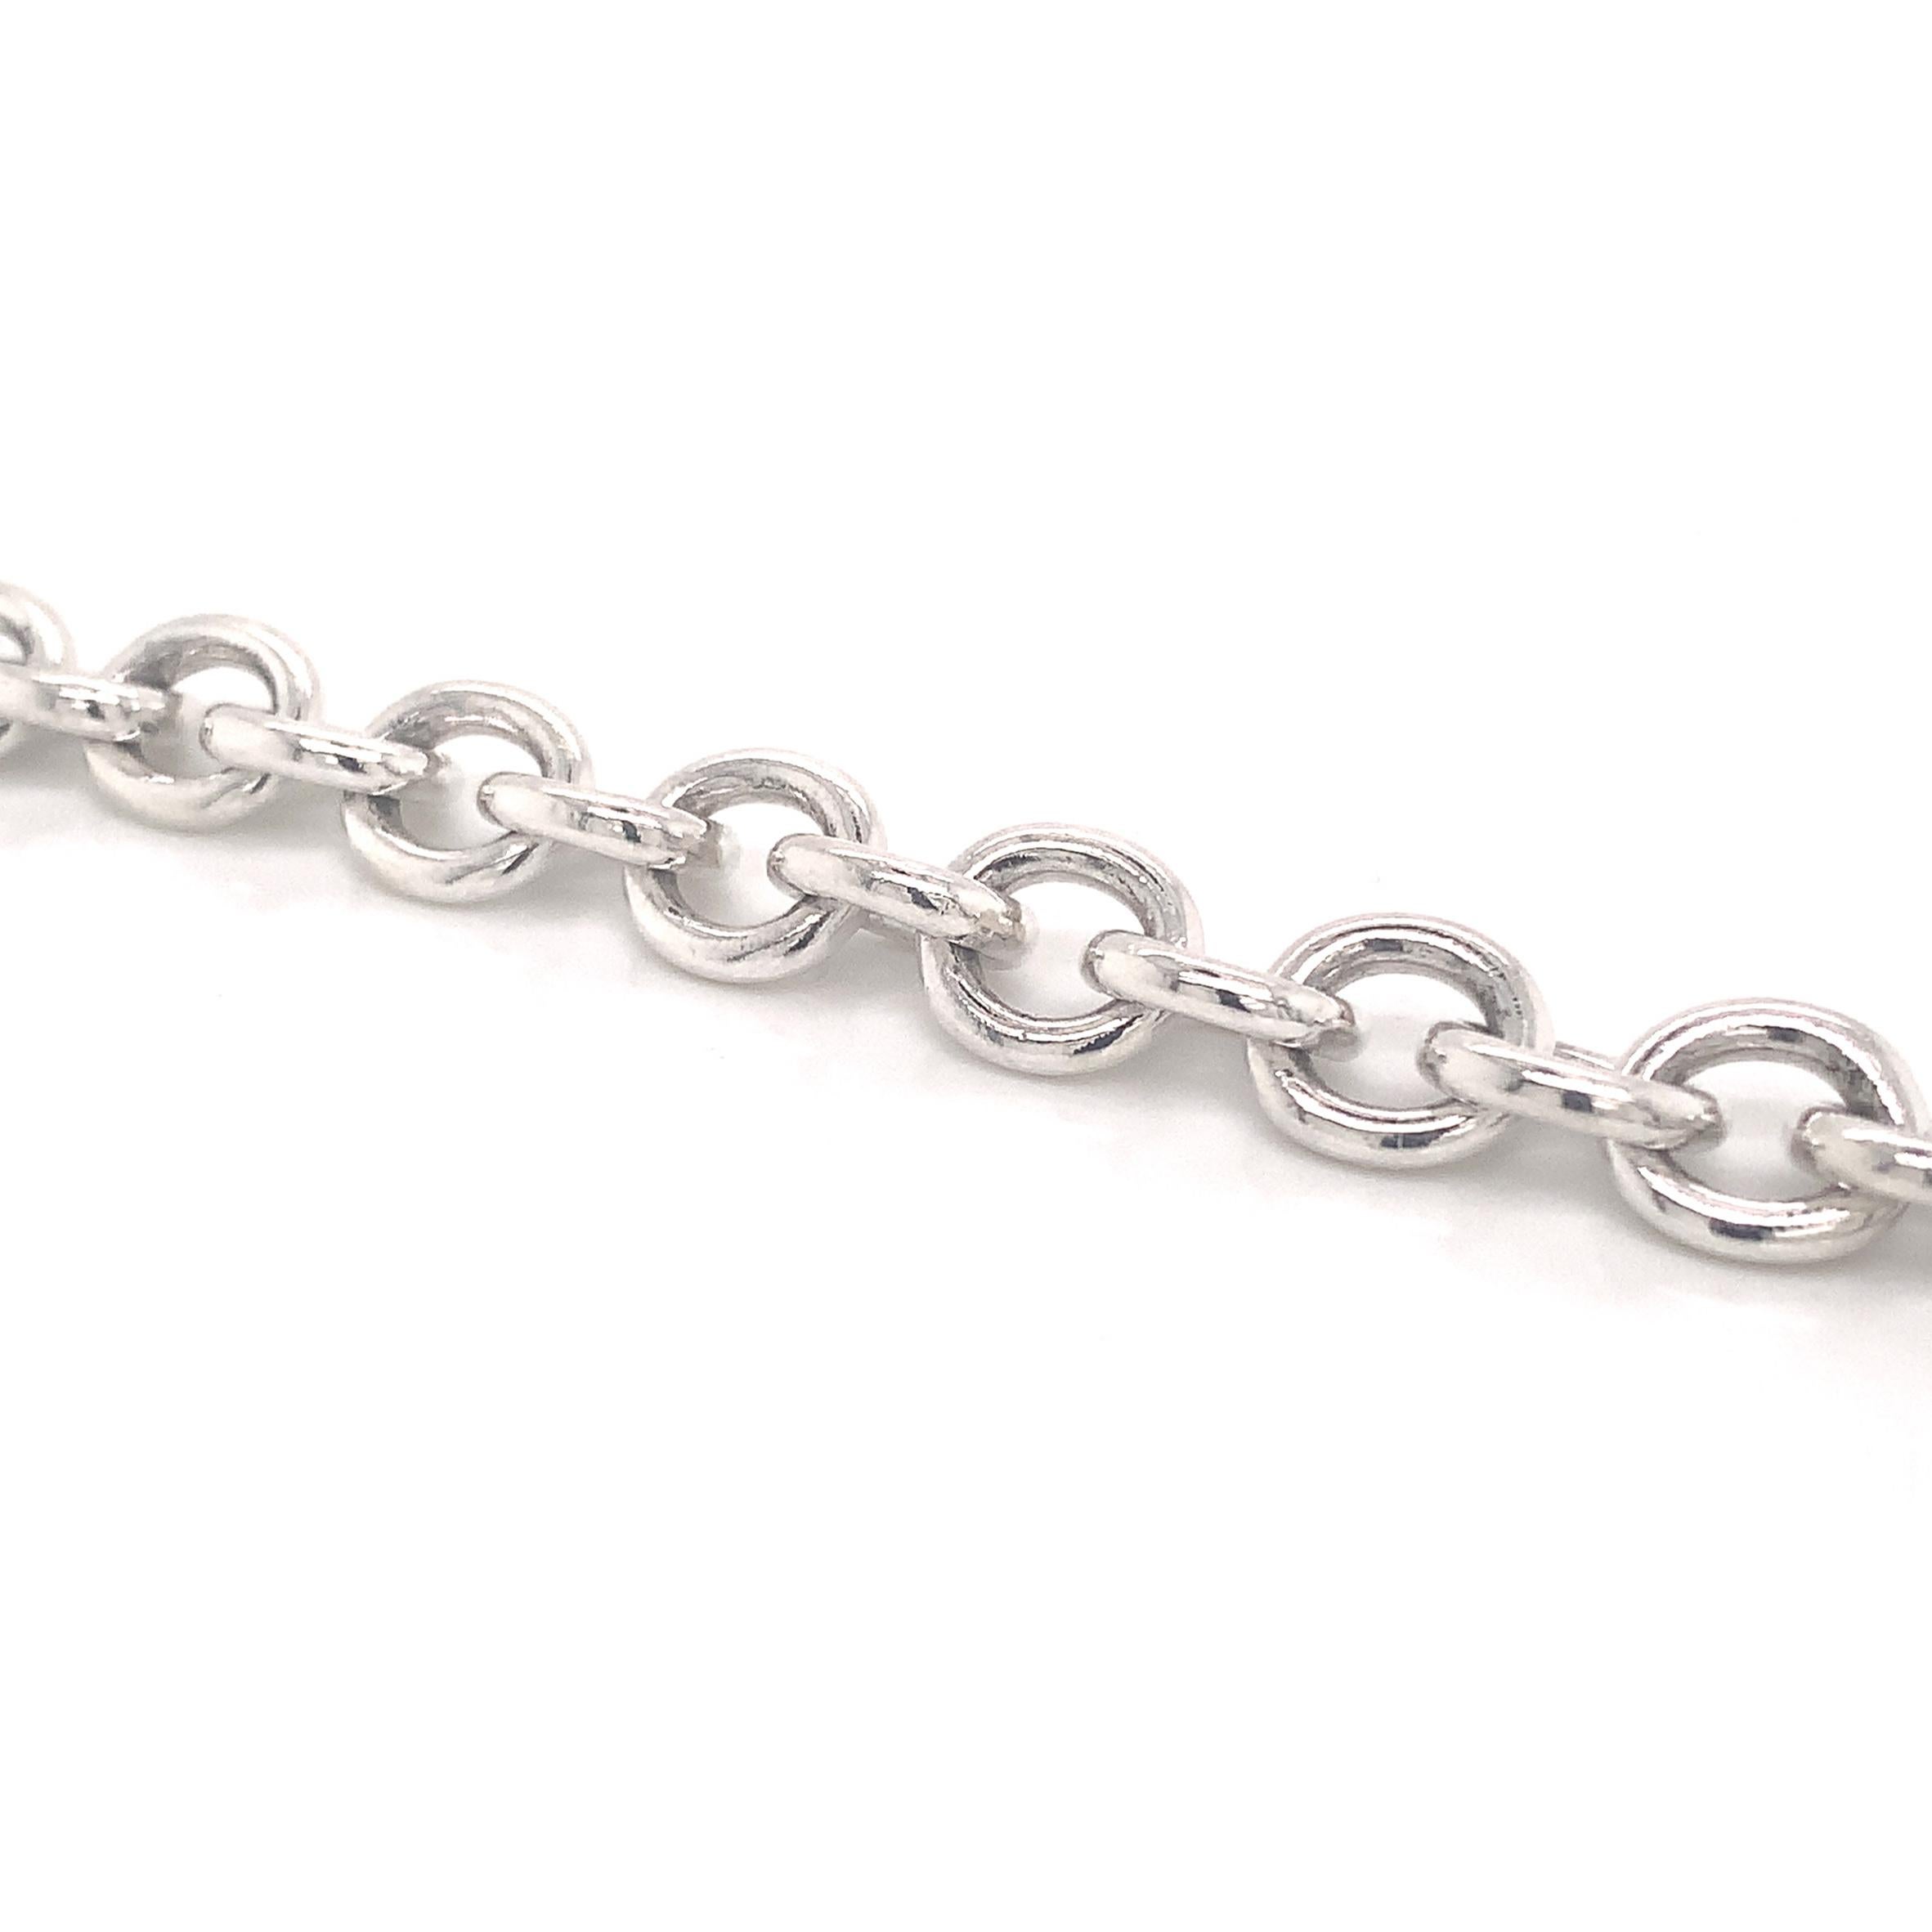 Tiffany & Co Estate Sterling Silver Bracelet 7.5 Inches 36.4 Grams TIF68
 
This elegant Authentic Tiffany & Co bracelet with heart charm is 7.5 inches in length.

TRUSTED SELLER SINCE 2002
 
PLEASE SEE OUR HUNDREDS OF POSITIVE FEEDBACKS FROM OUR